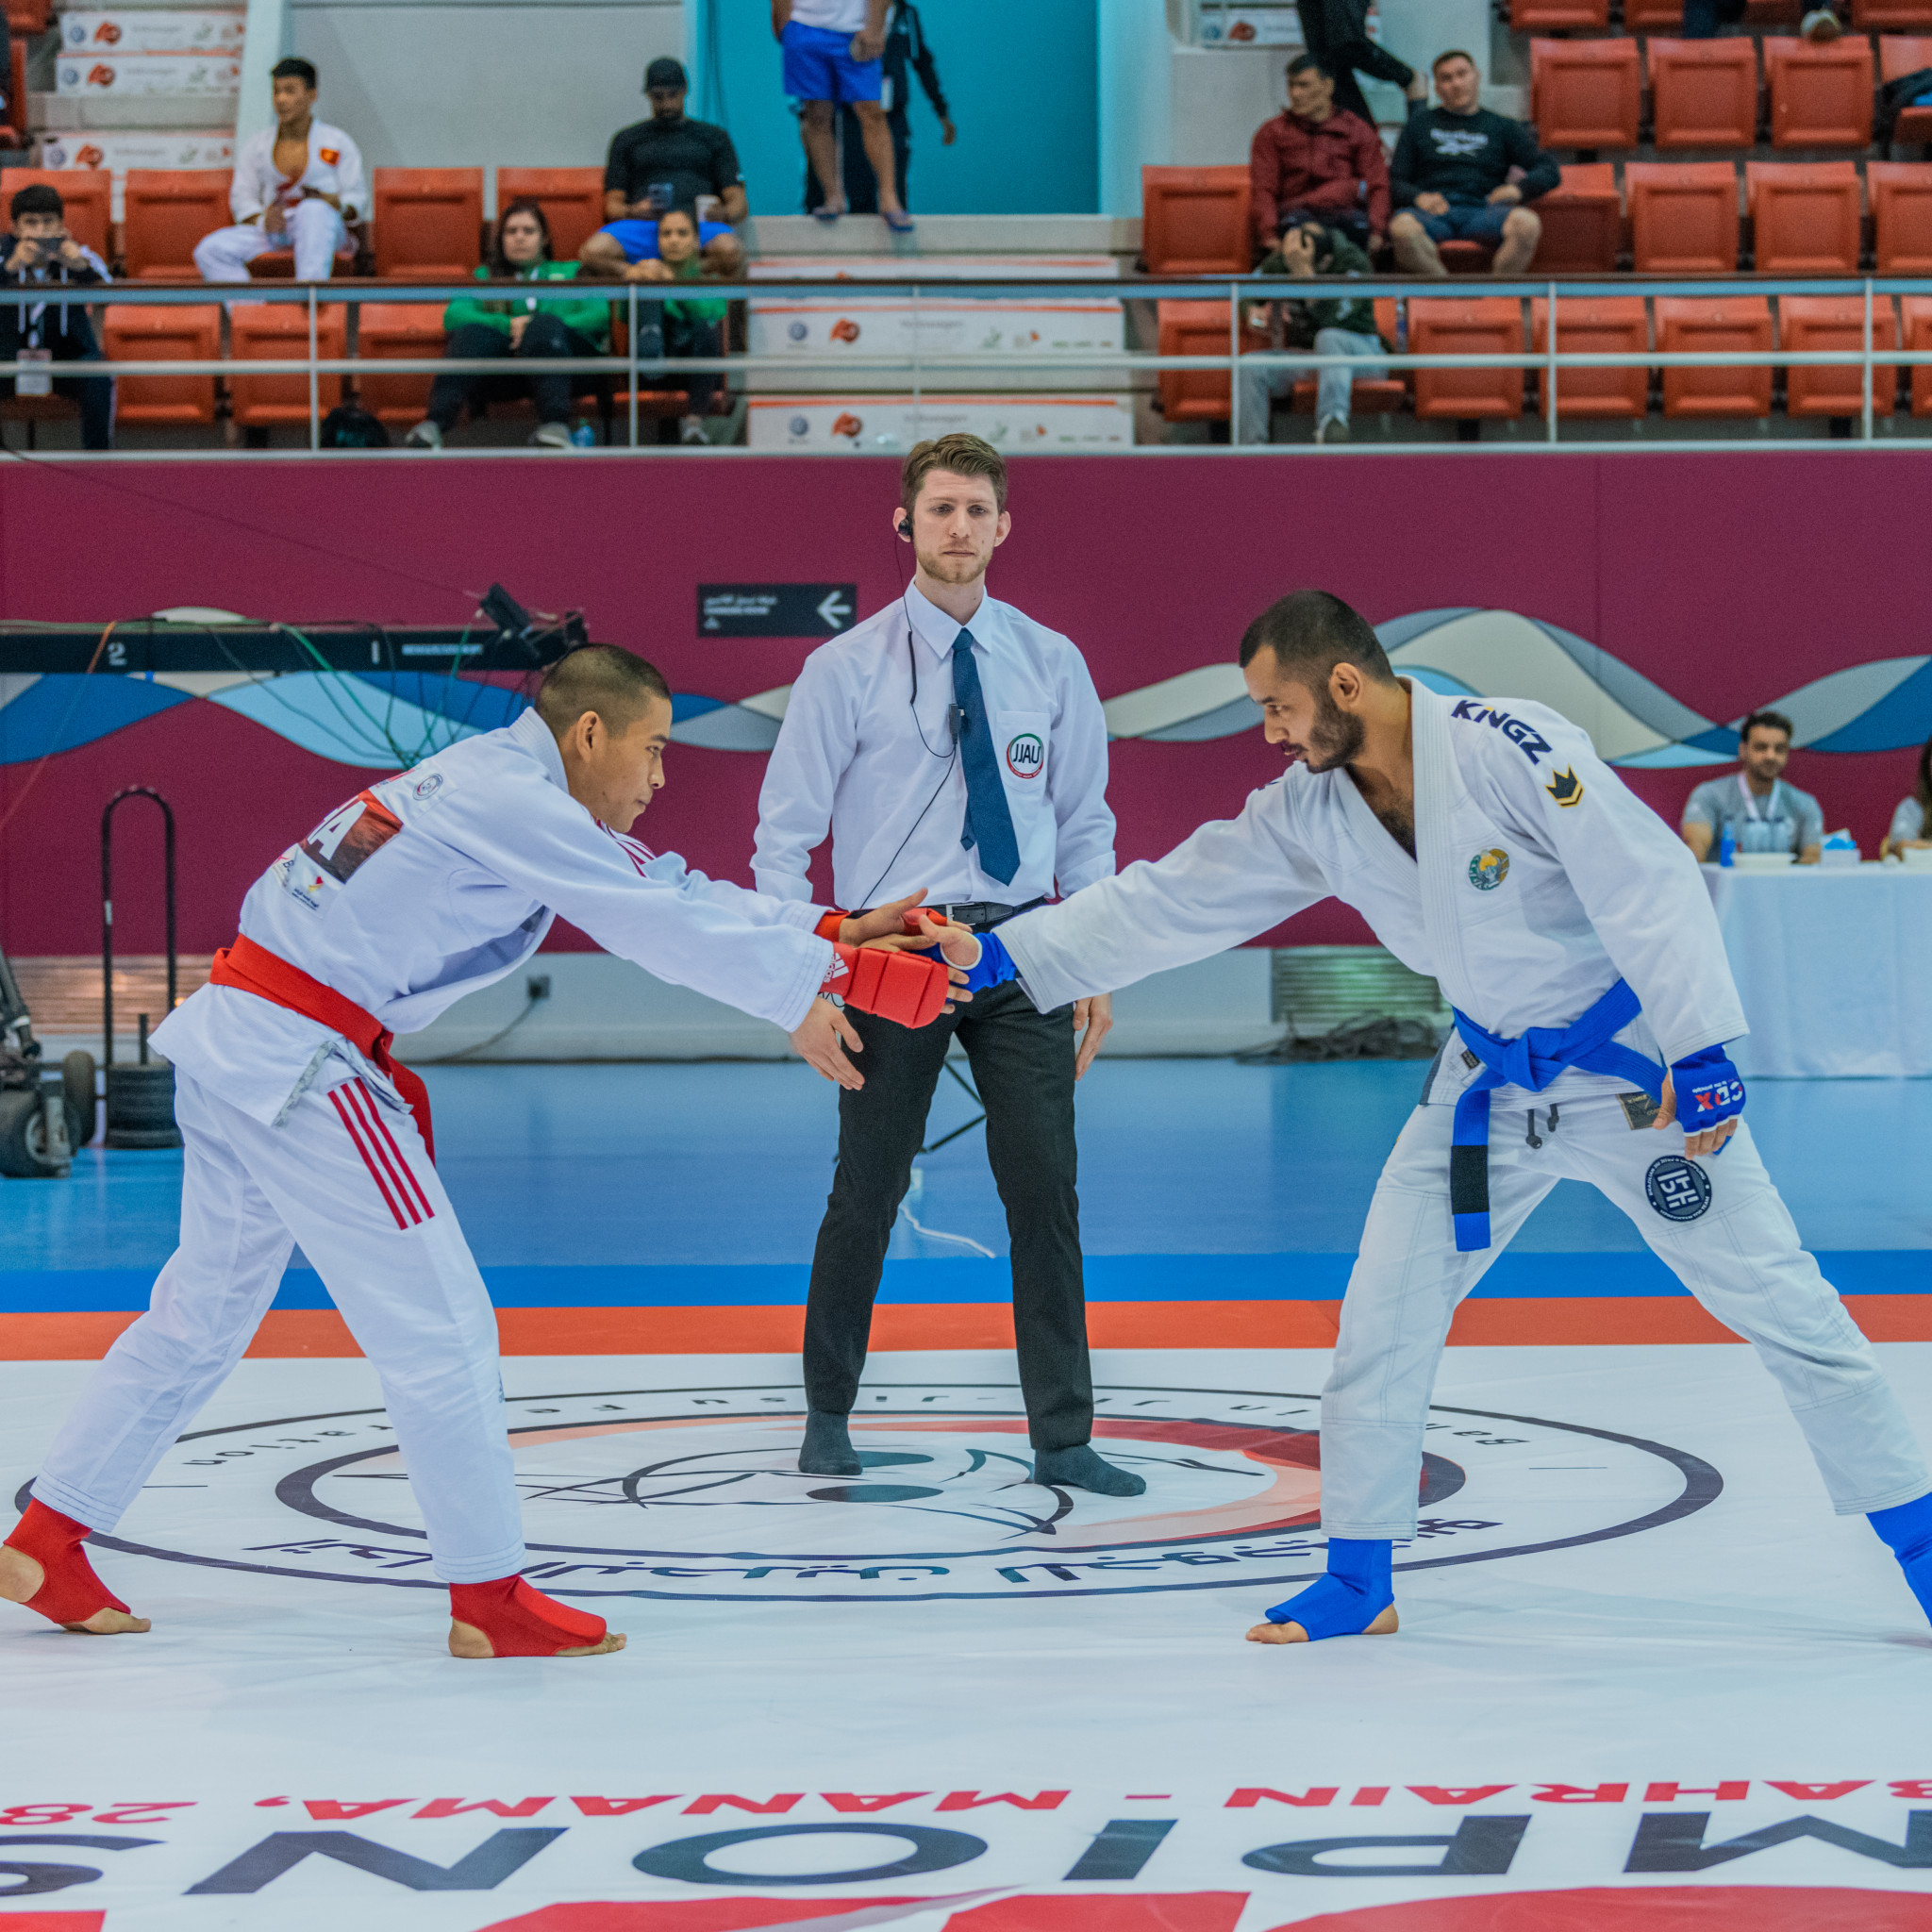 A mark of respect between athletes at the start of the bout is a common sign in ju-jitsu ©JJAU